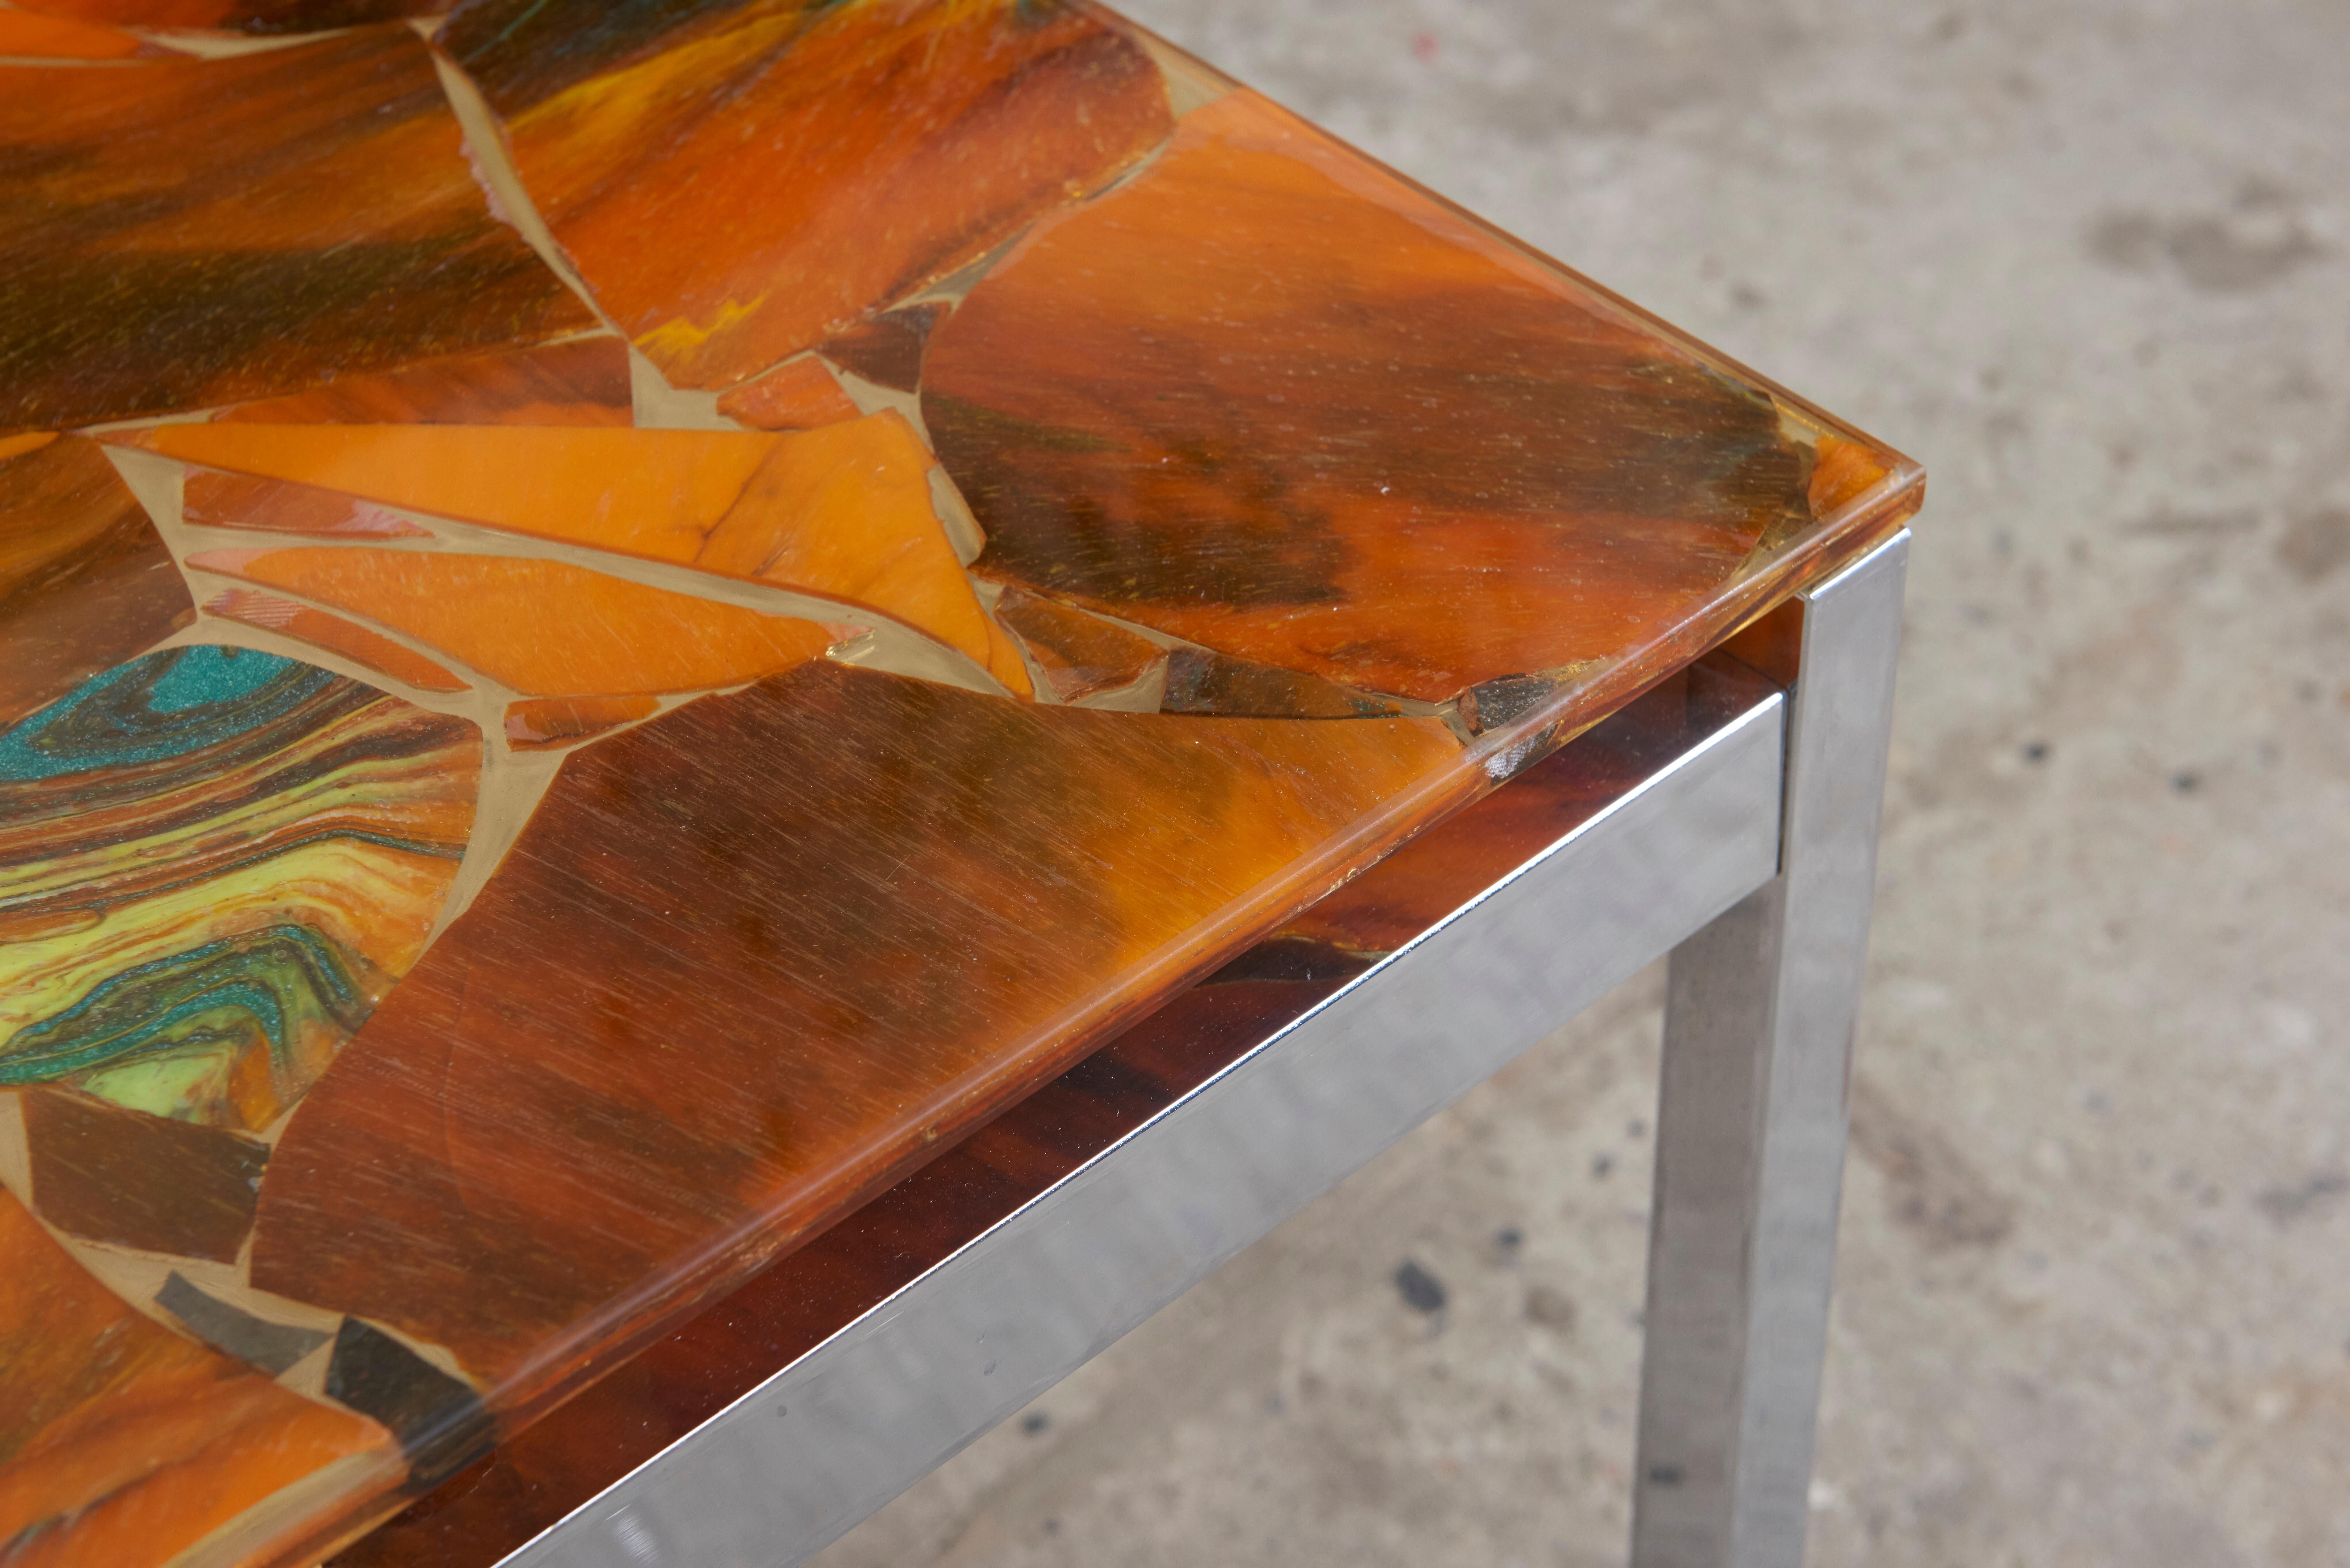 A beautiful decorative 1970s table with a rectangular metal chrome frame and a top of marbled glass in a mosaic pattern, which gives an airy translucence to the coffee table, very nice quality of this rare design.

This coffee or side table is an